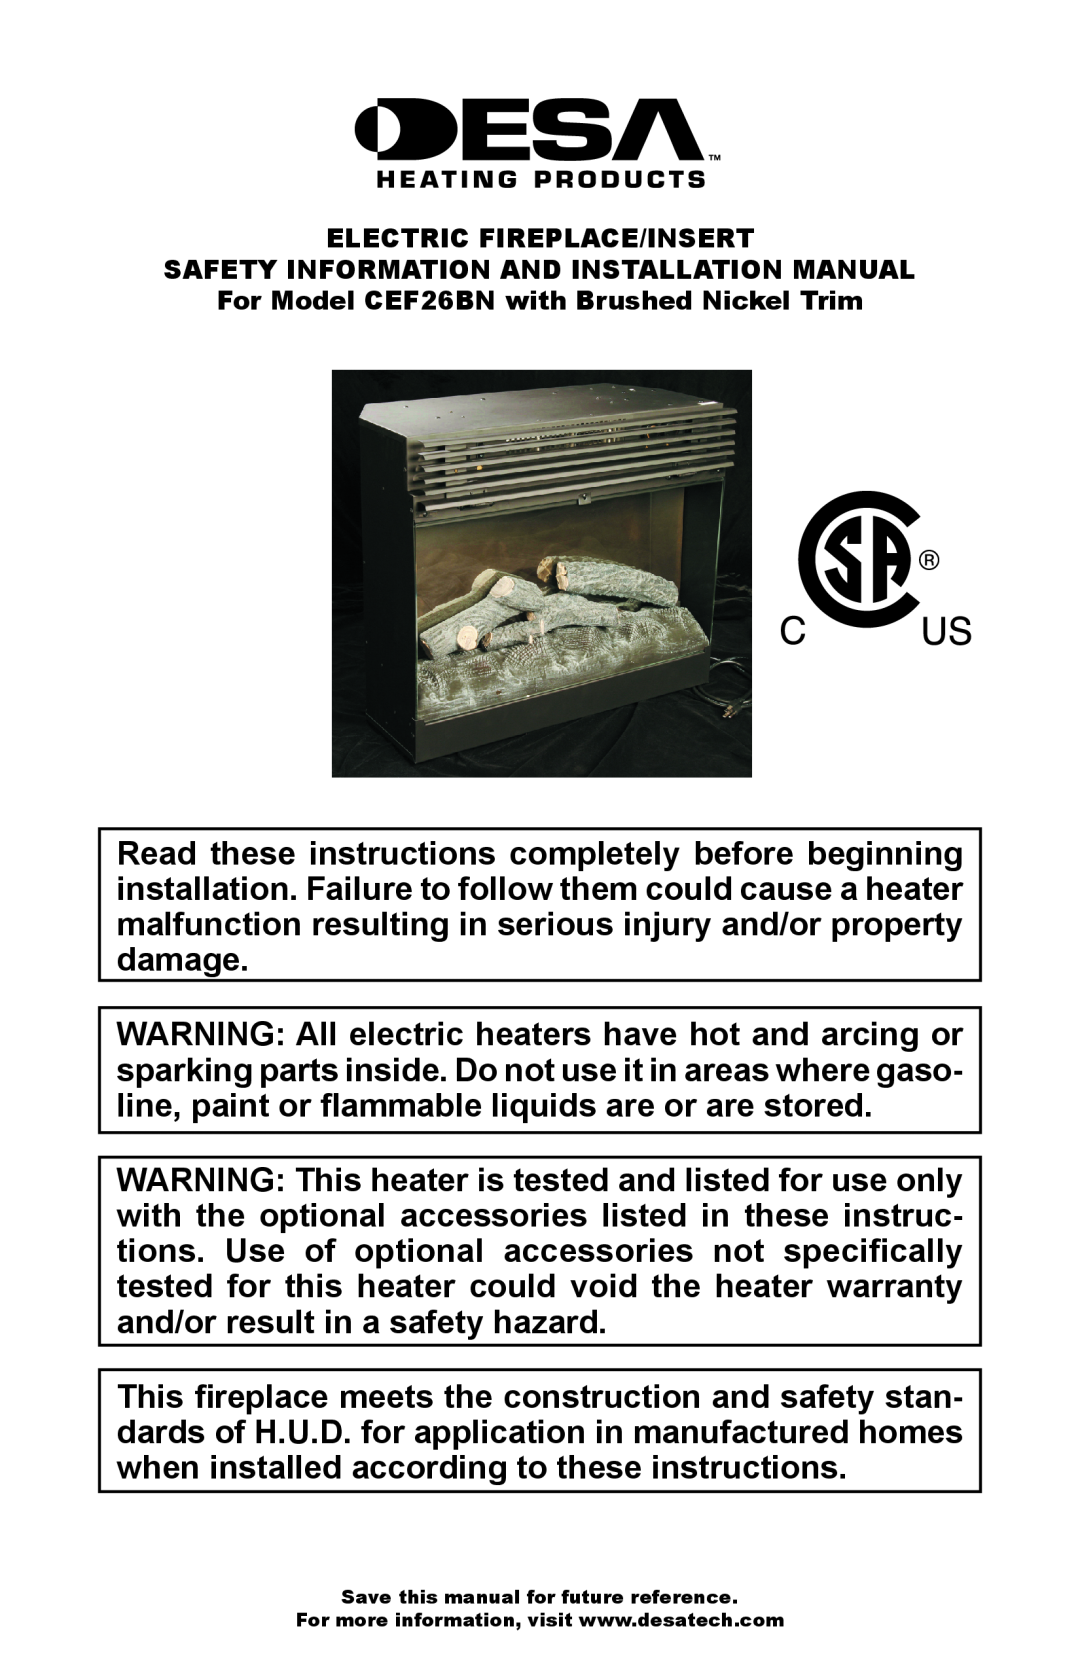 Desa CEF26BN warranty Electric Fireplace/Insert, Safety Information And Installation Manual 